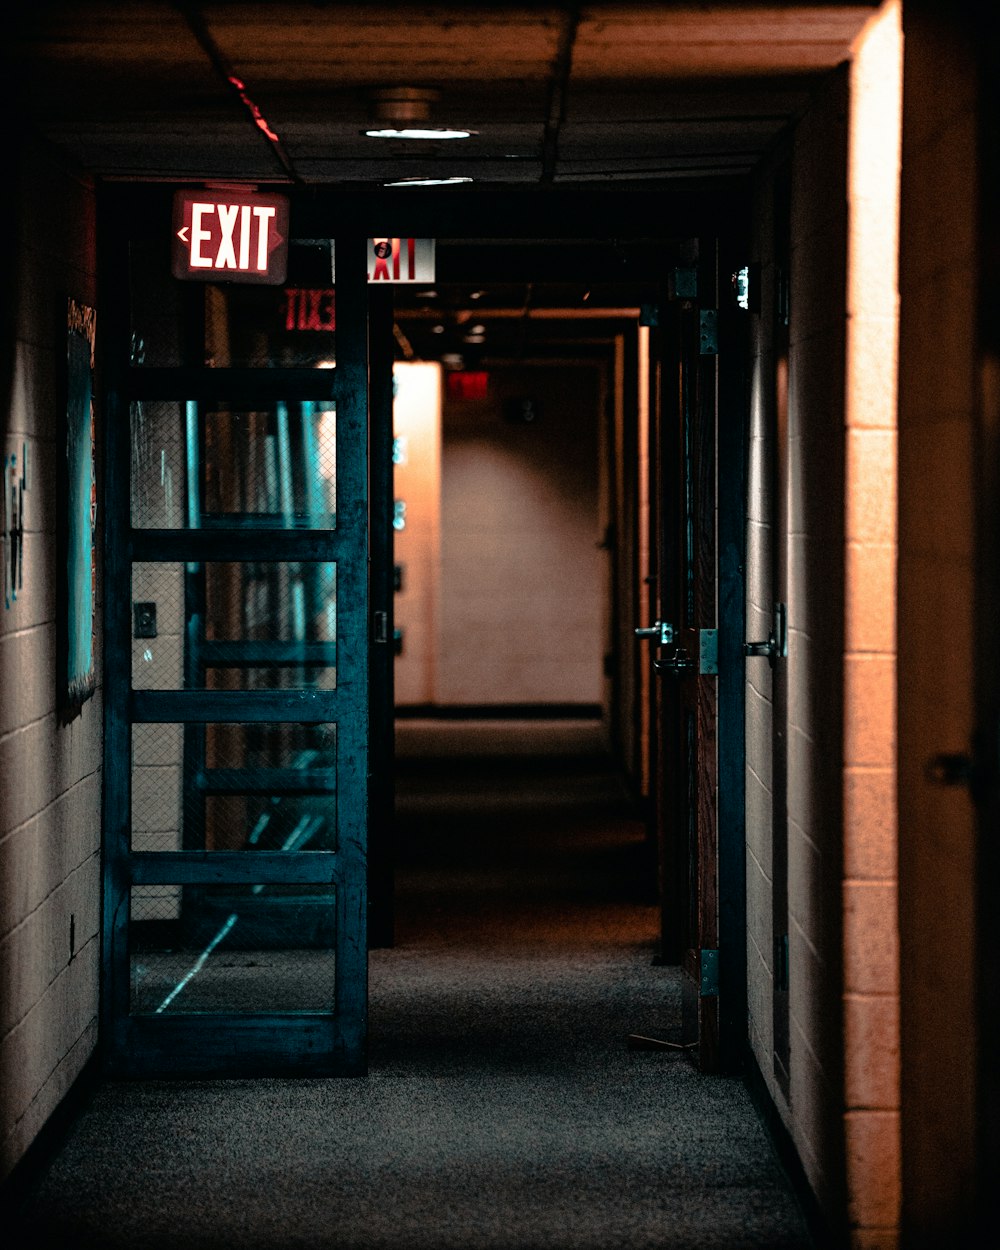 a hallway with a exit sign next to a book shelf